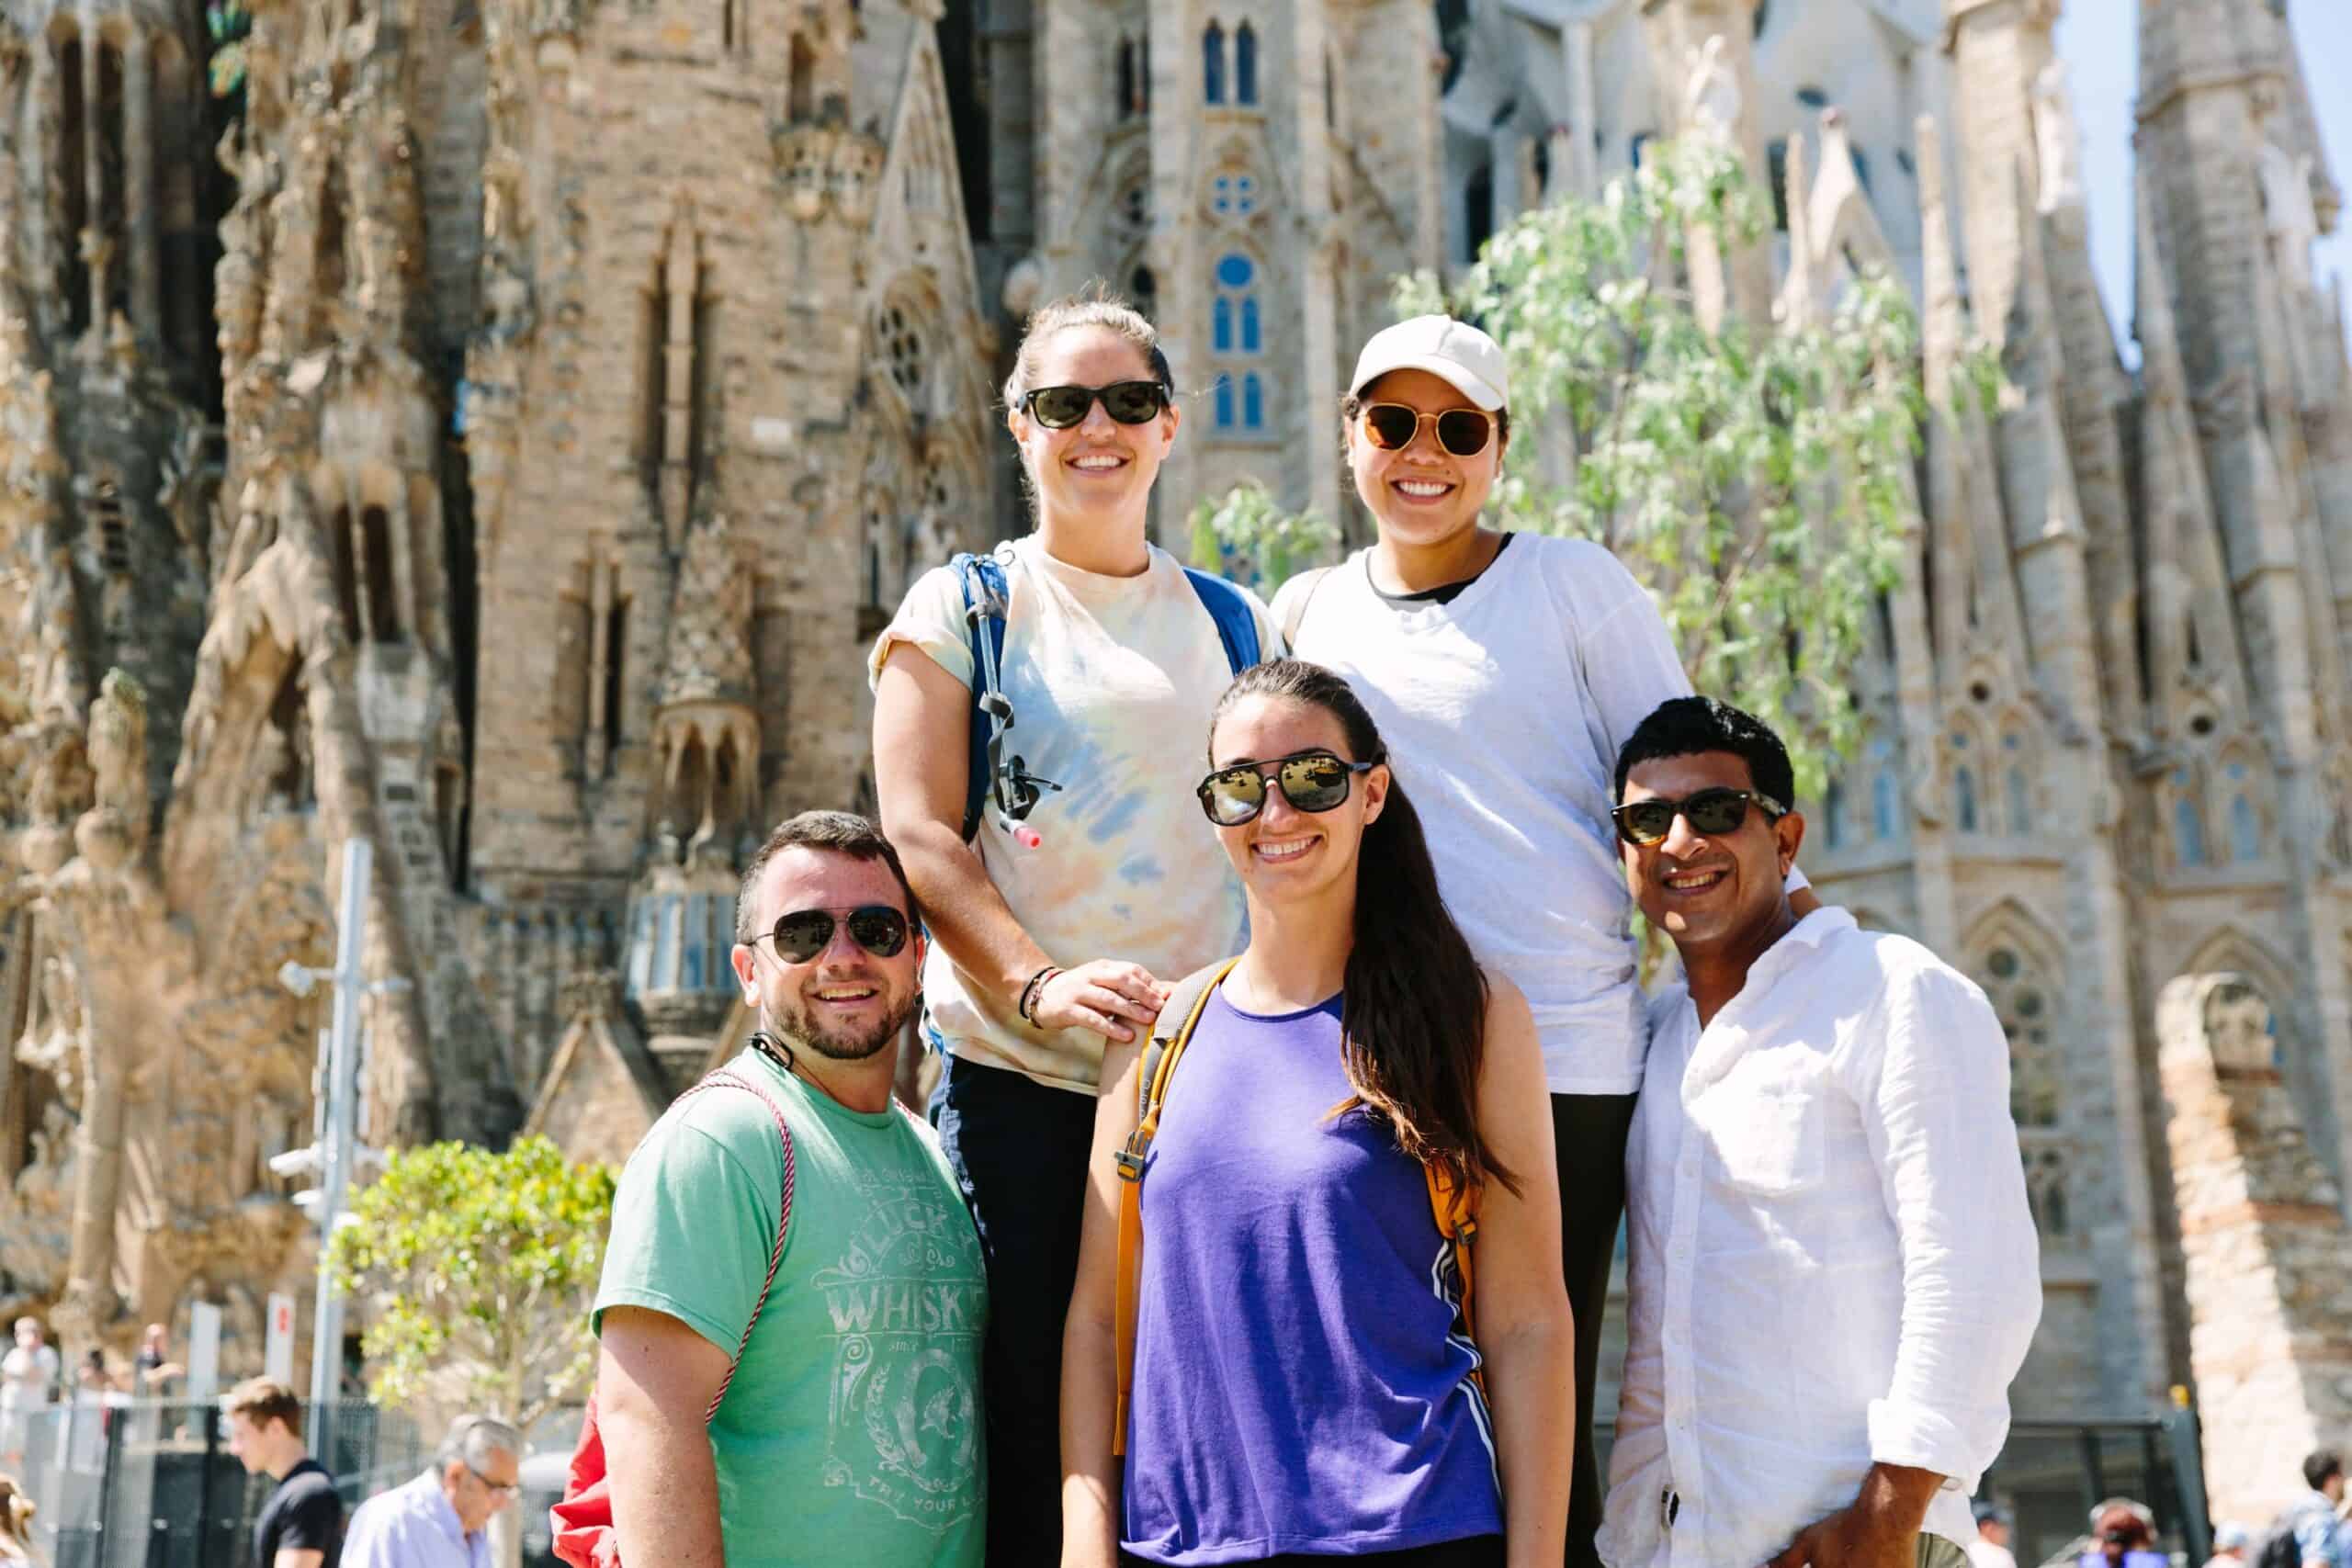 A group stands in front of the Sagrada Familia in Barcelona, Spain